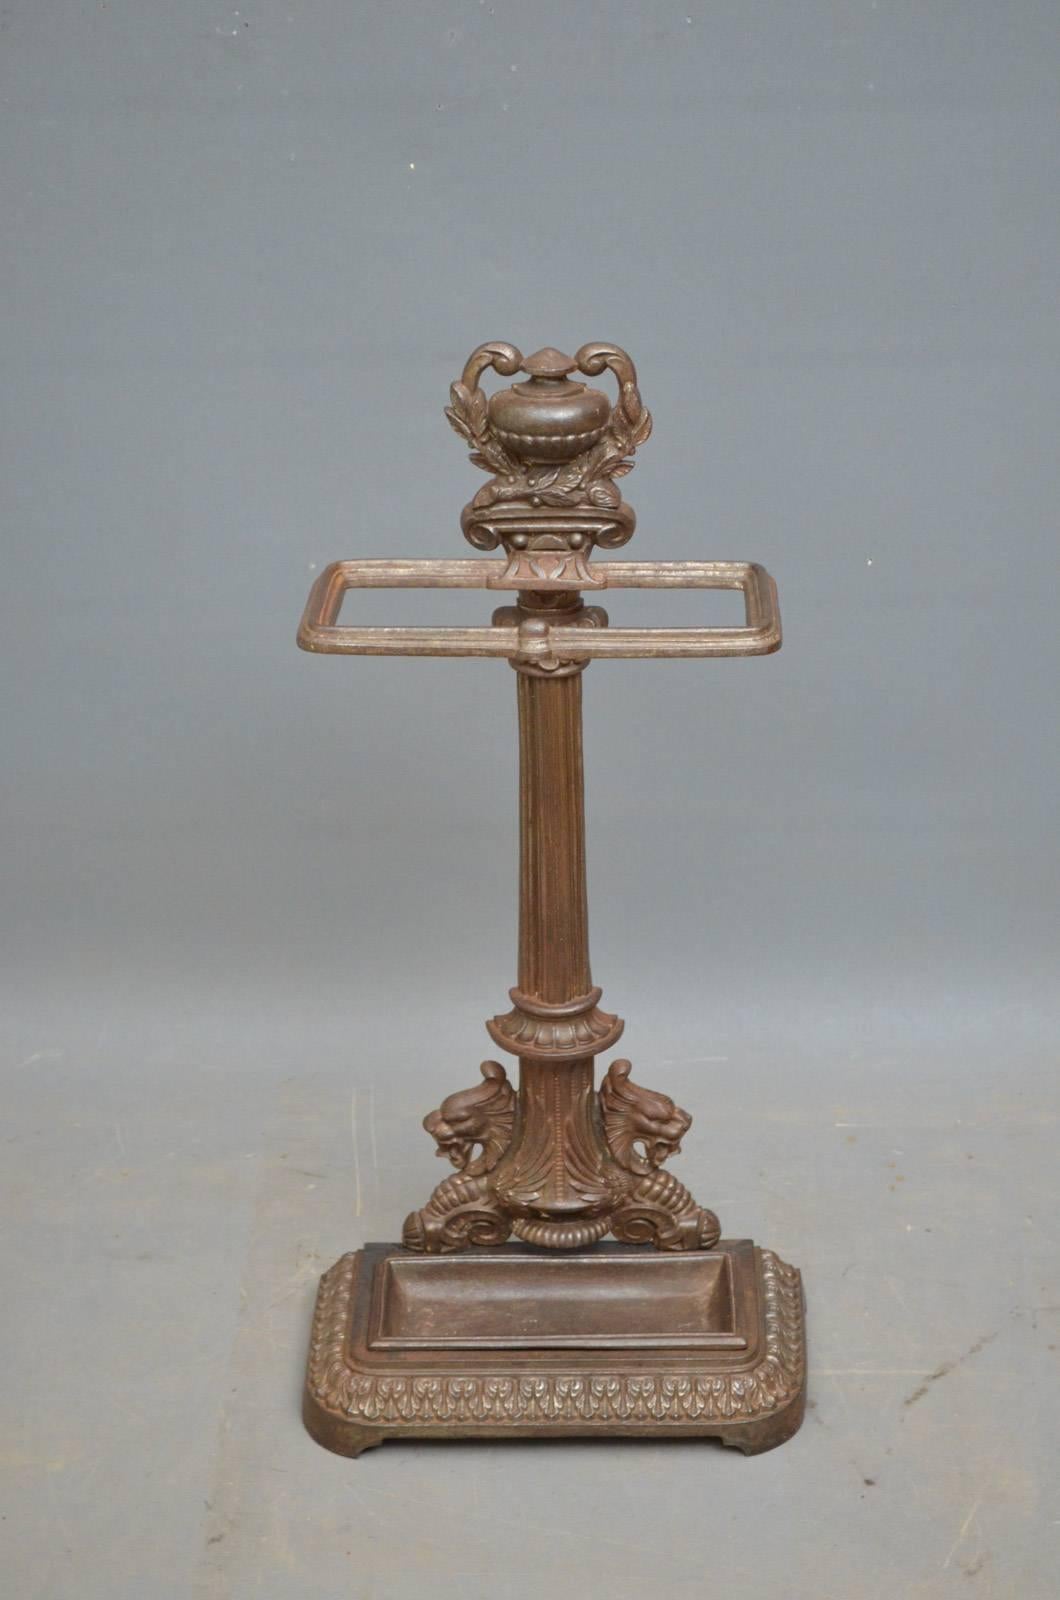 K0277 Victorian cast iron stick stand of elegant design and excellent original condition throughout, circa 1870
Measures: H 27.5